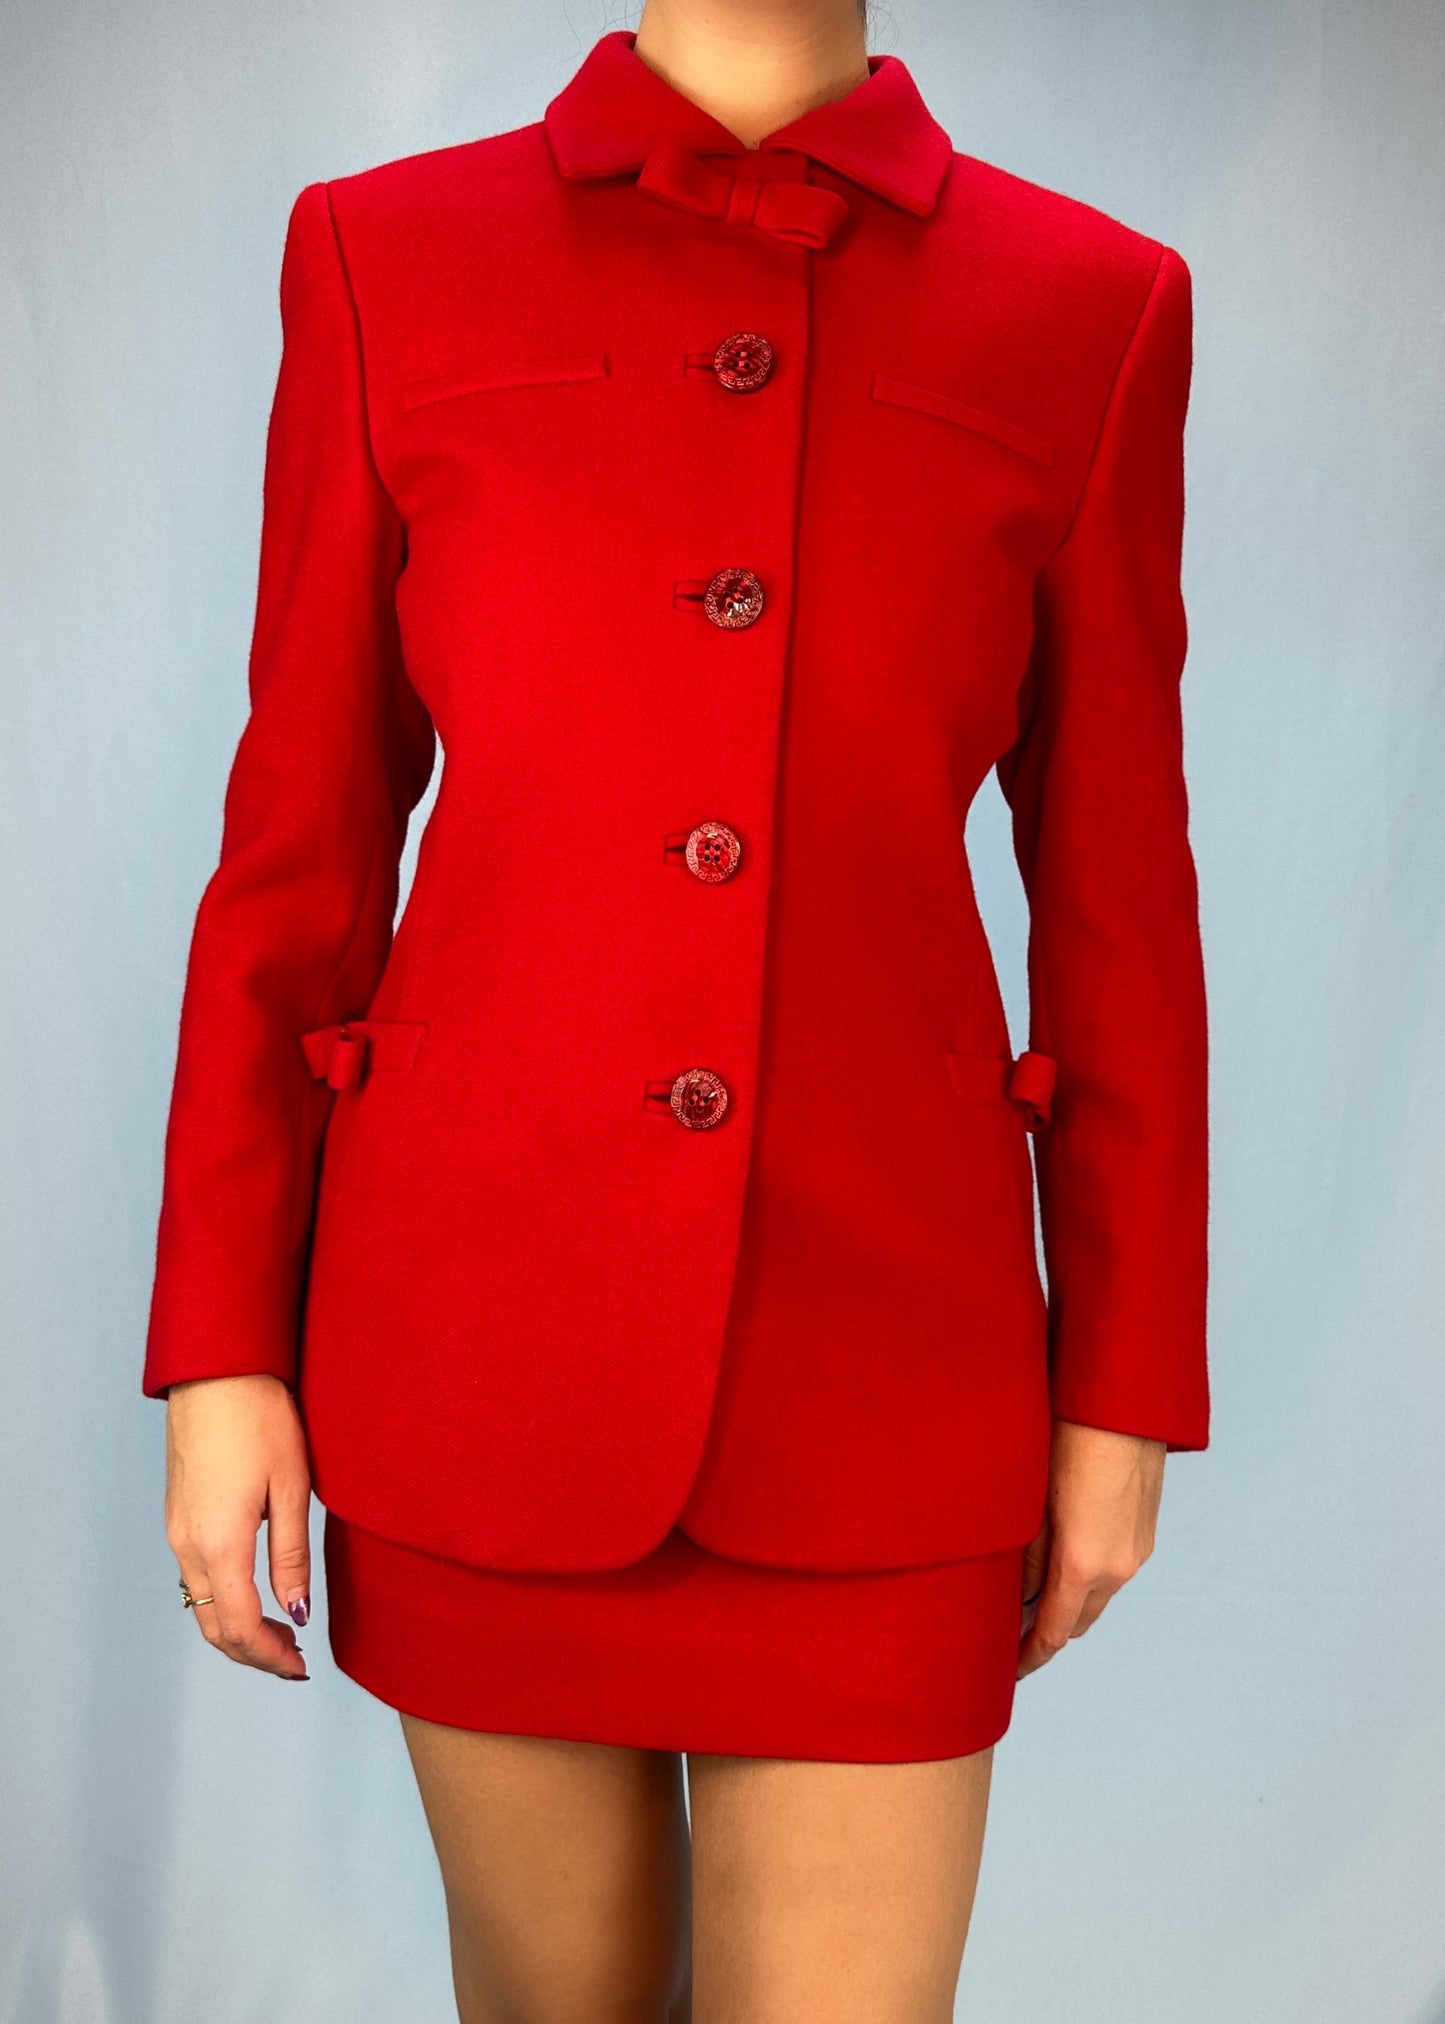 Versace Red Bow Jacket & Skirt Suit Set